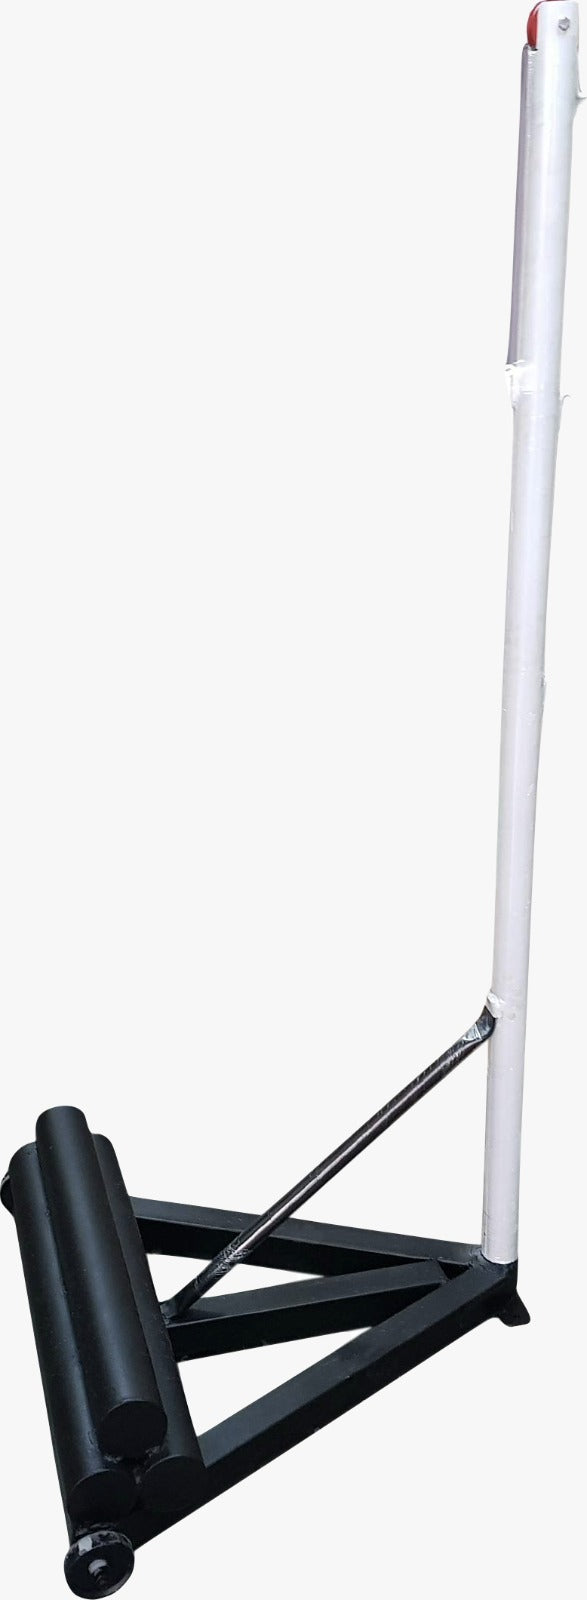 Badminton Pole Portable With 100kg Weight